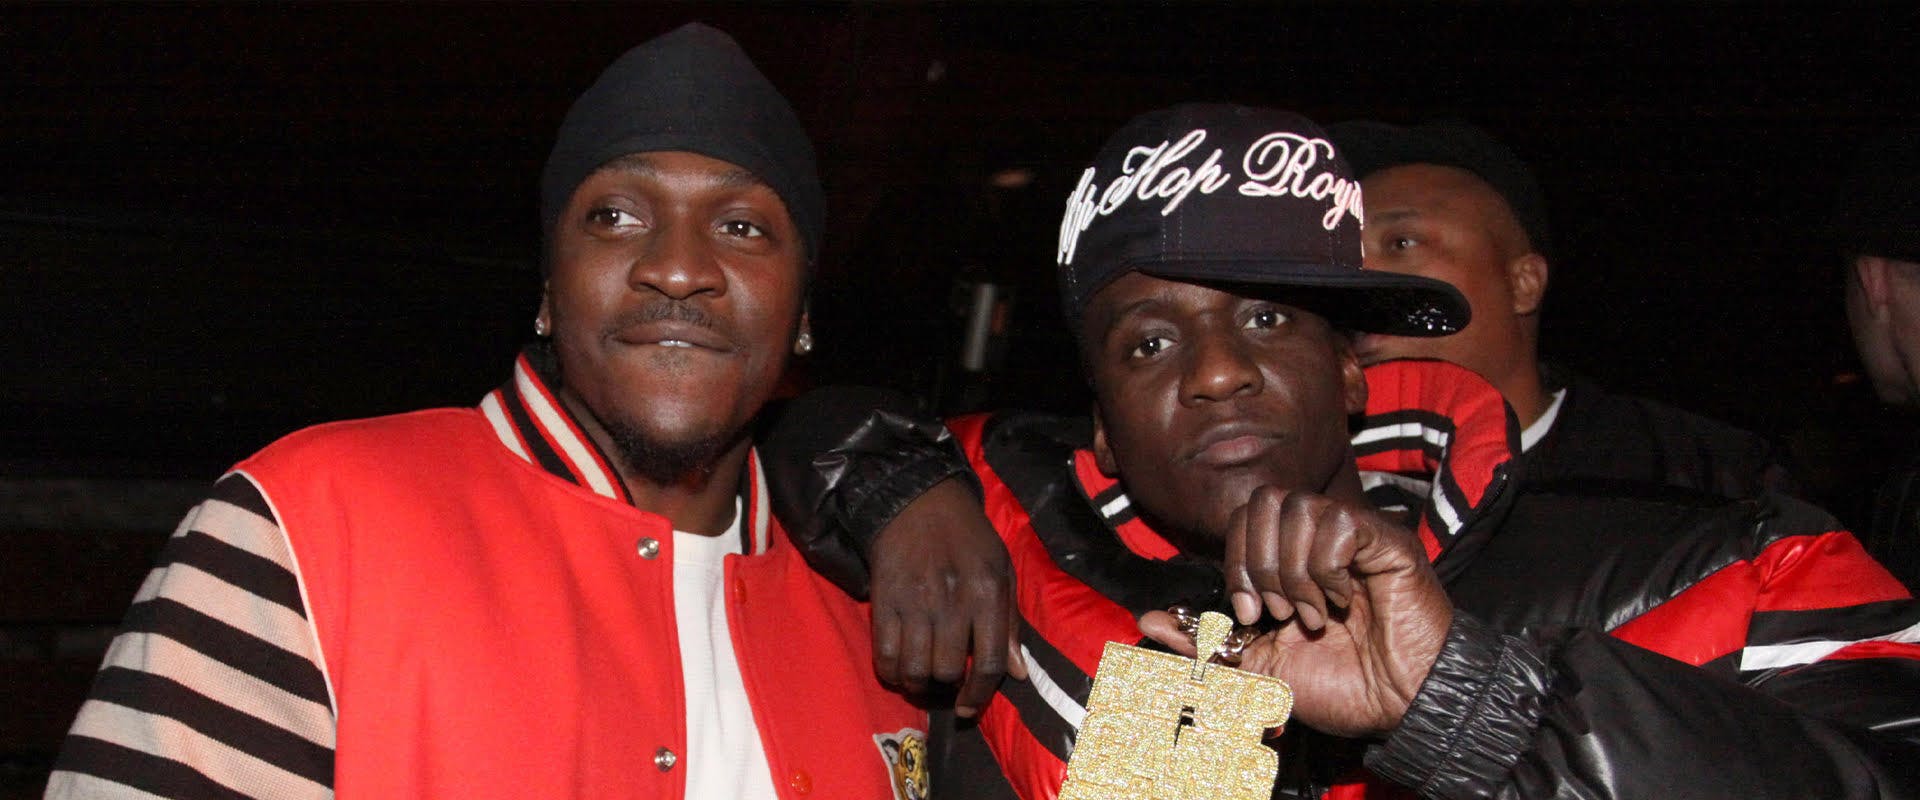 Pusha T and Malice of Clipse attend the Clipse Til The Casket Drops album release party at Pink Elephant on December 9, 2009 in New York City